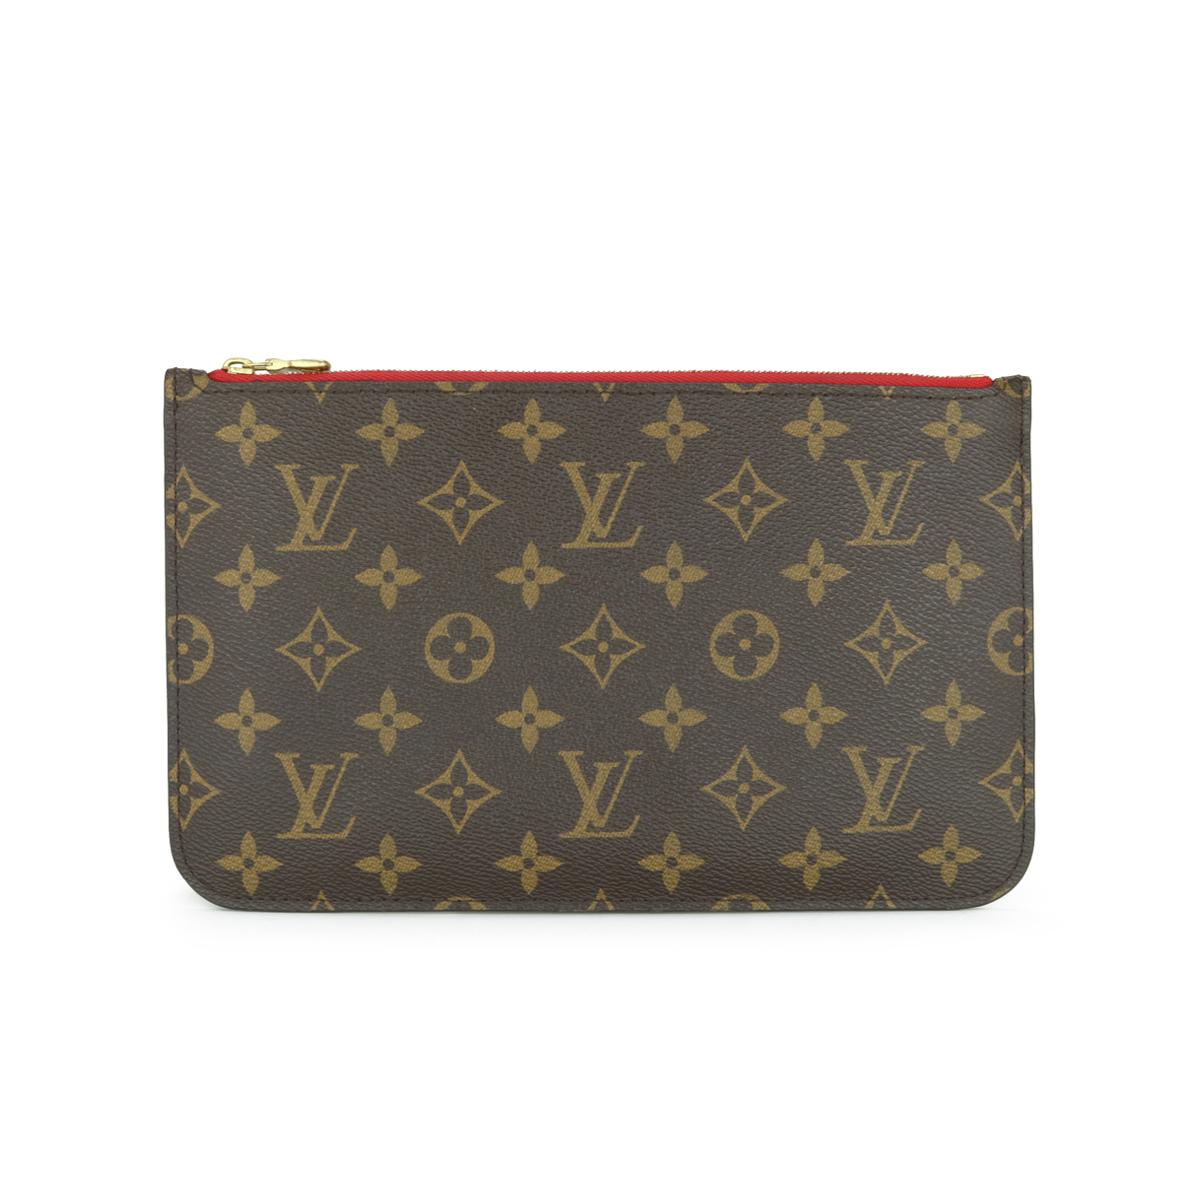 Louis Vuitton Neverfull MM Zip Pochette Pouch in Monogram with Cherry Red Interior 2020.

This pouch is in very good condition. 

- Exterior Condition: Very good condition. There is very light inking wear to the corners and two topside endpoints.